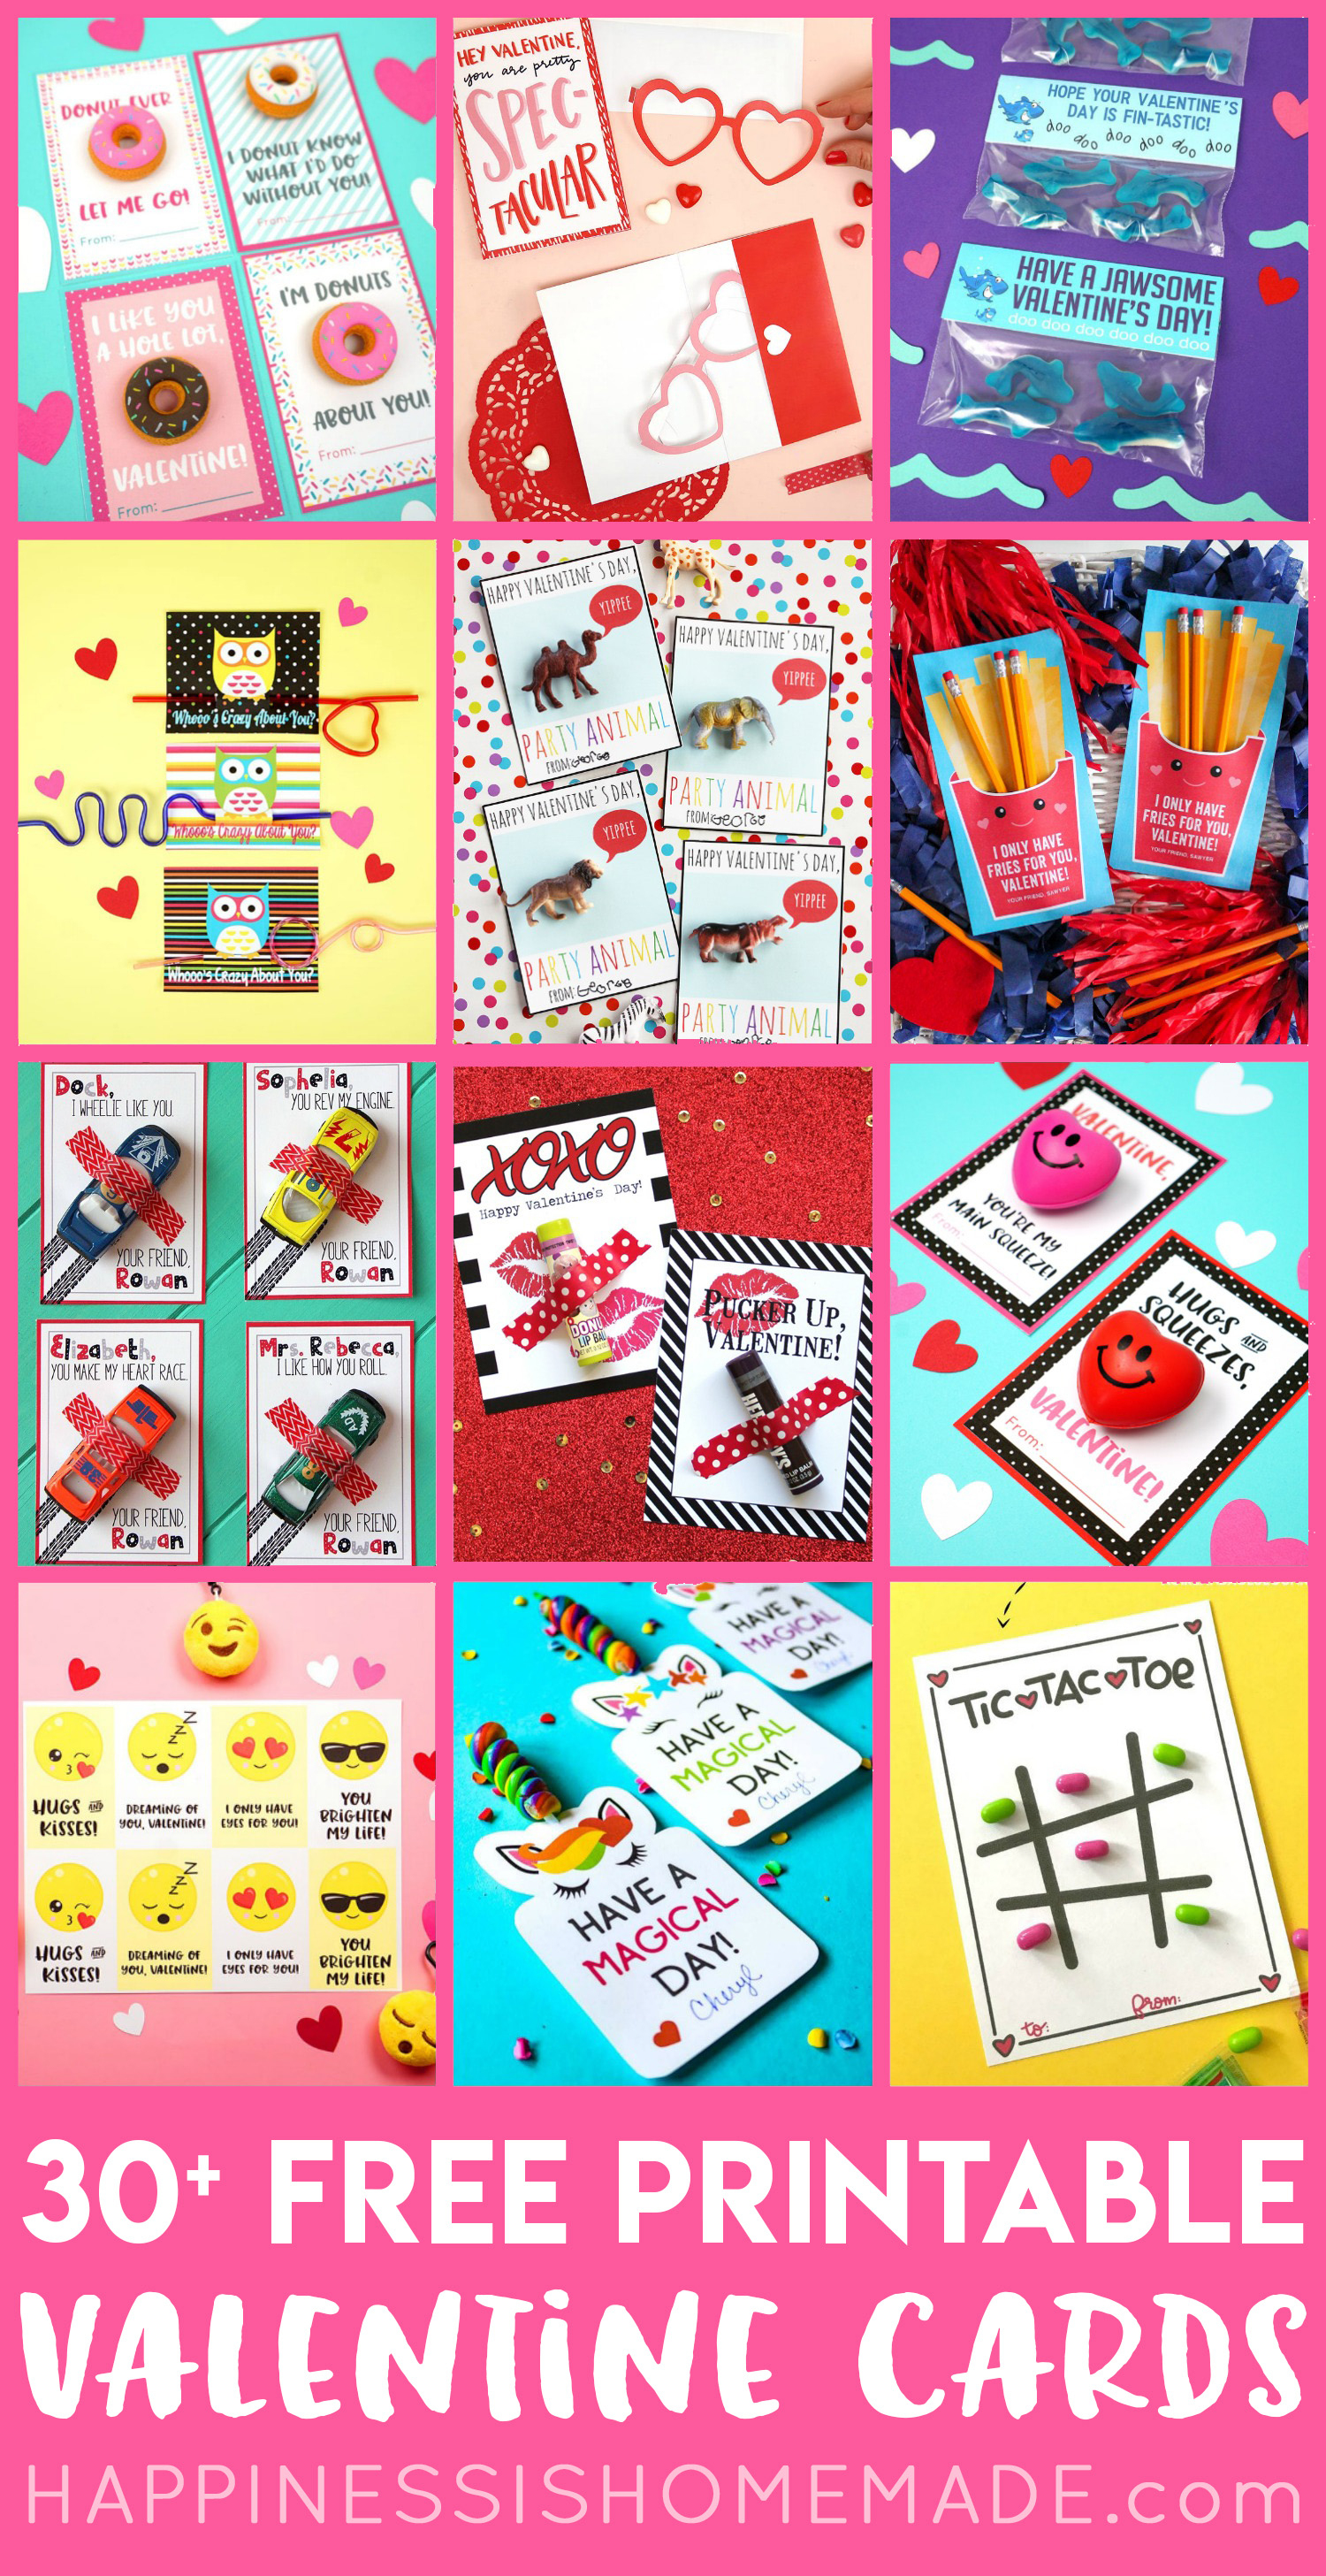 30+ Free Printable Valentine Cards - Happiness Is Homemade - Free Printable Images